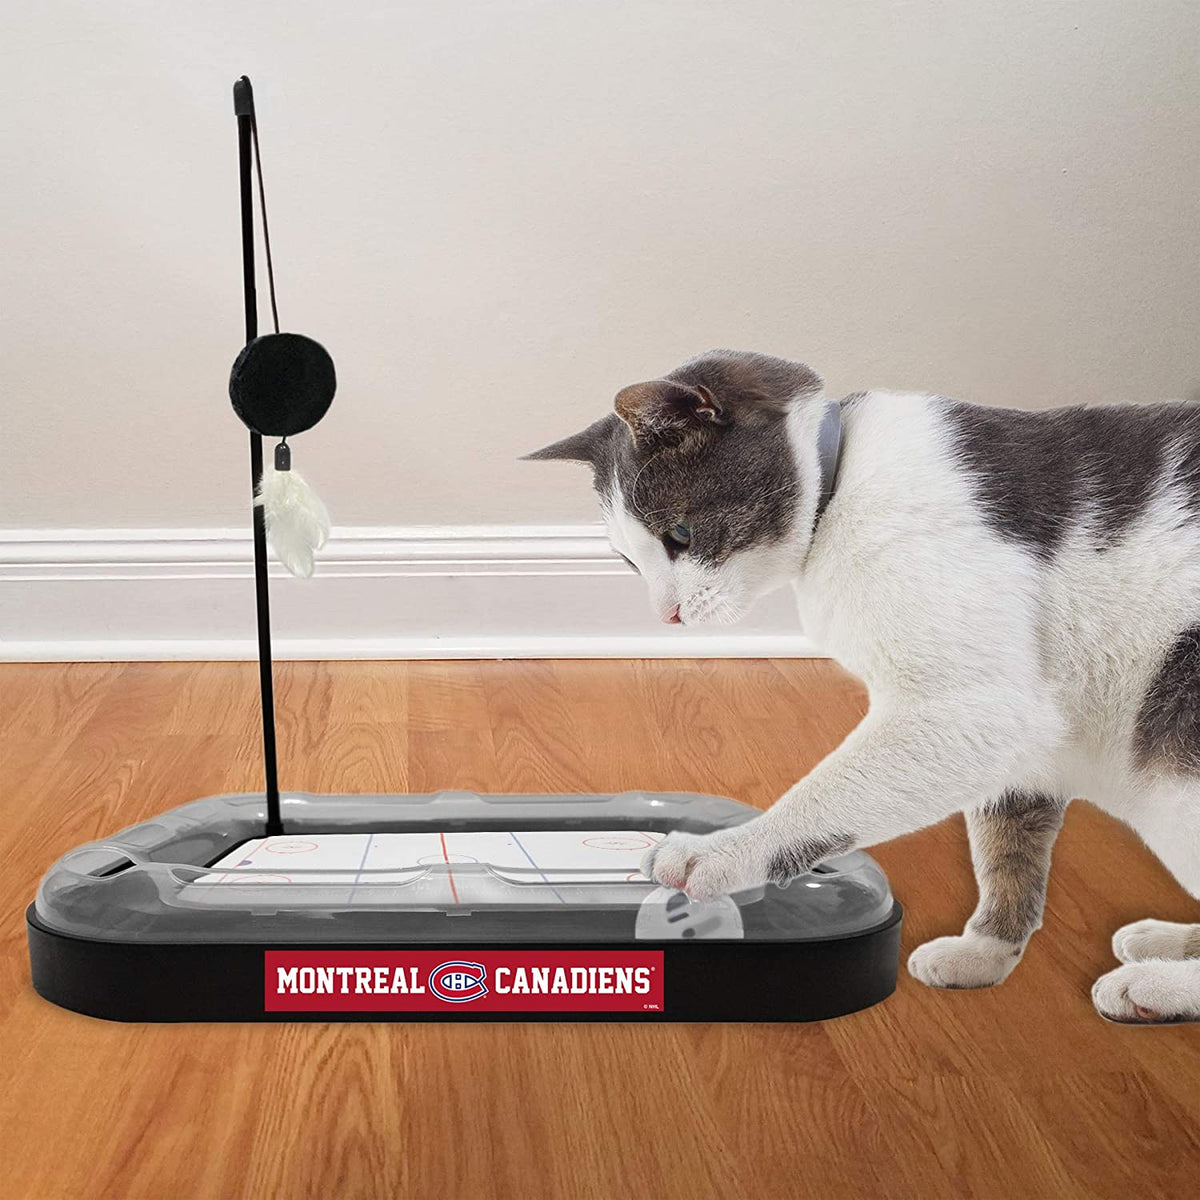 Montreal Canadiens Hockey Rink Cat Scratcher Toy